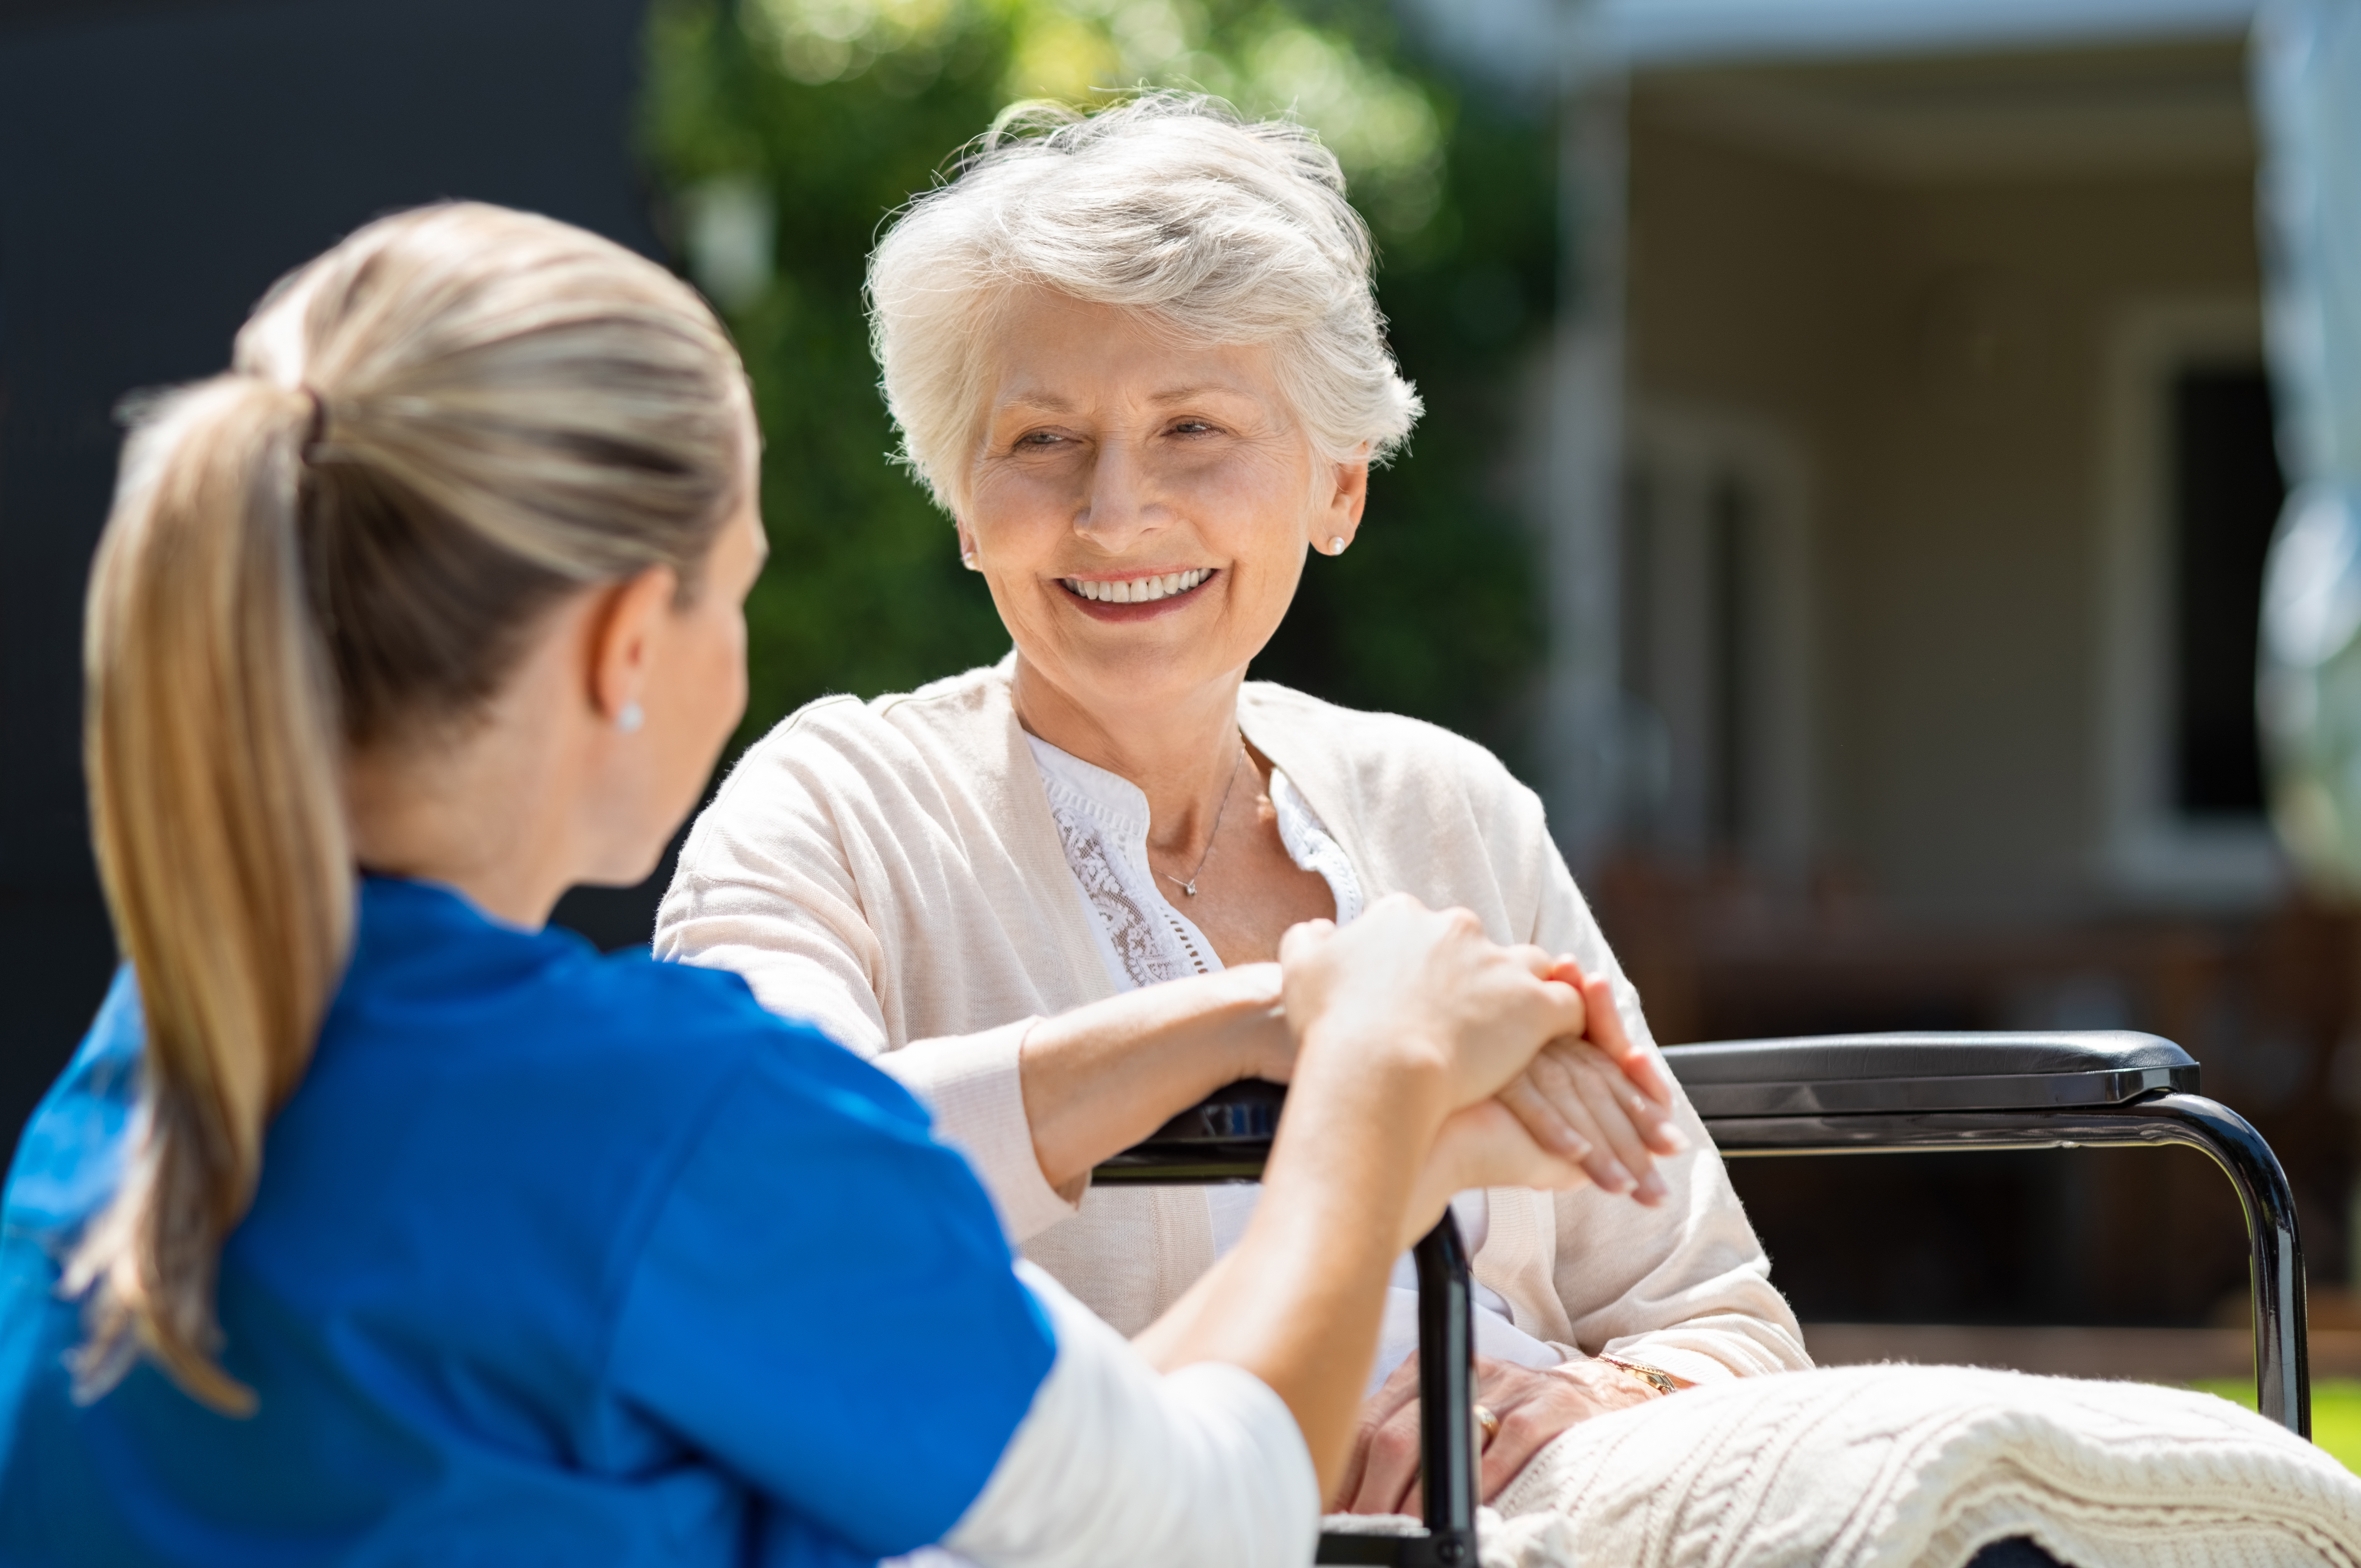 Smiling senior patient sitting on wheelchair with nurse supporting her. Doctor looking at elderly patient on a wheelchair in the garden. Nurse holding hand of mature woman outside pension home.